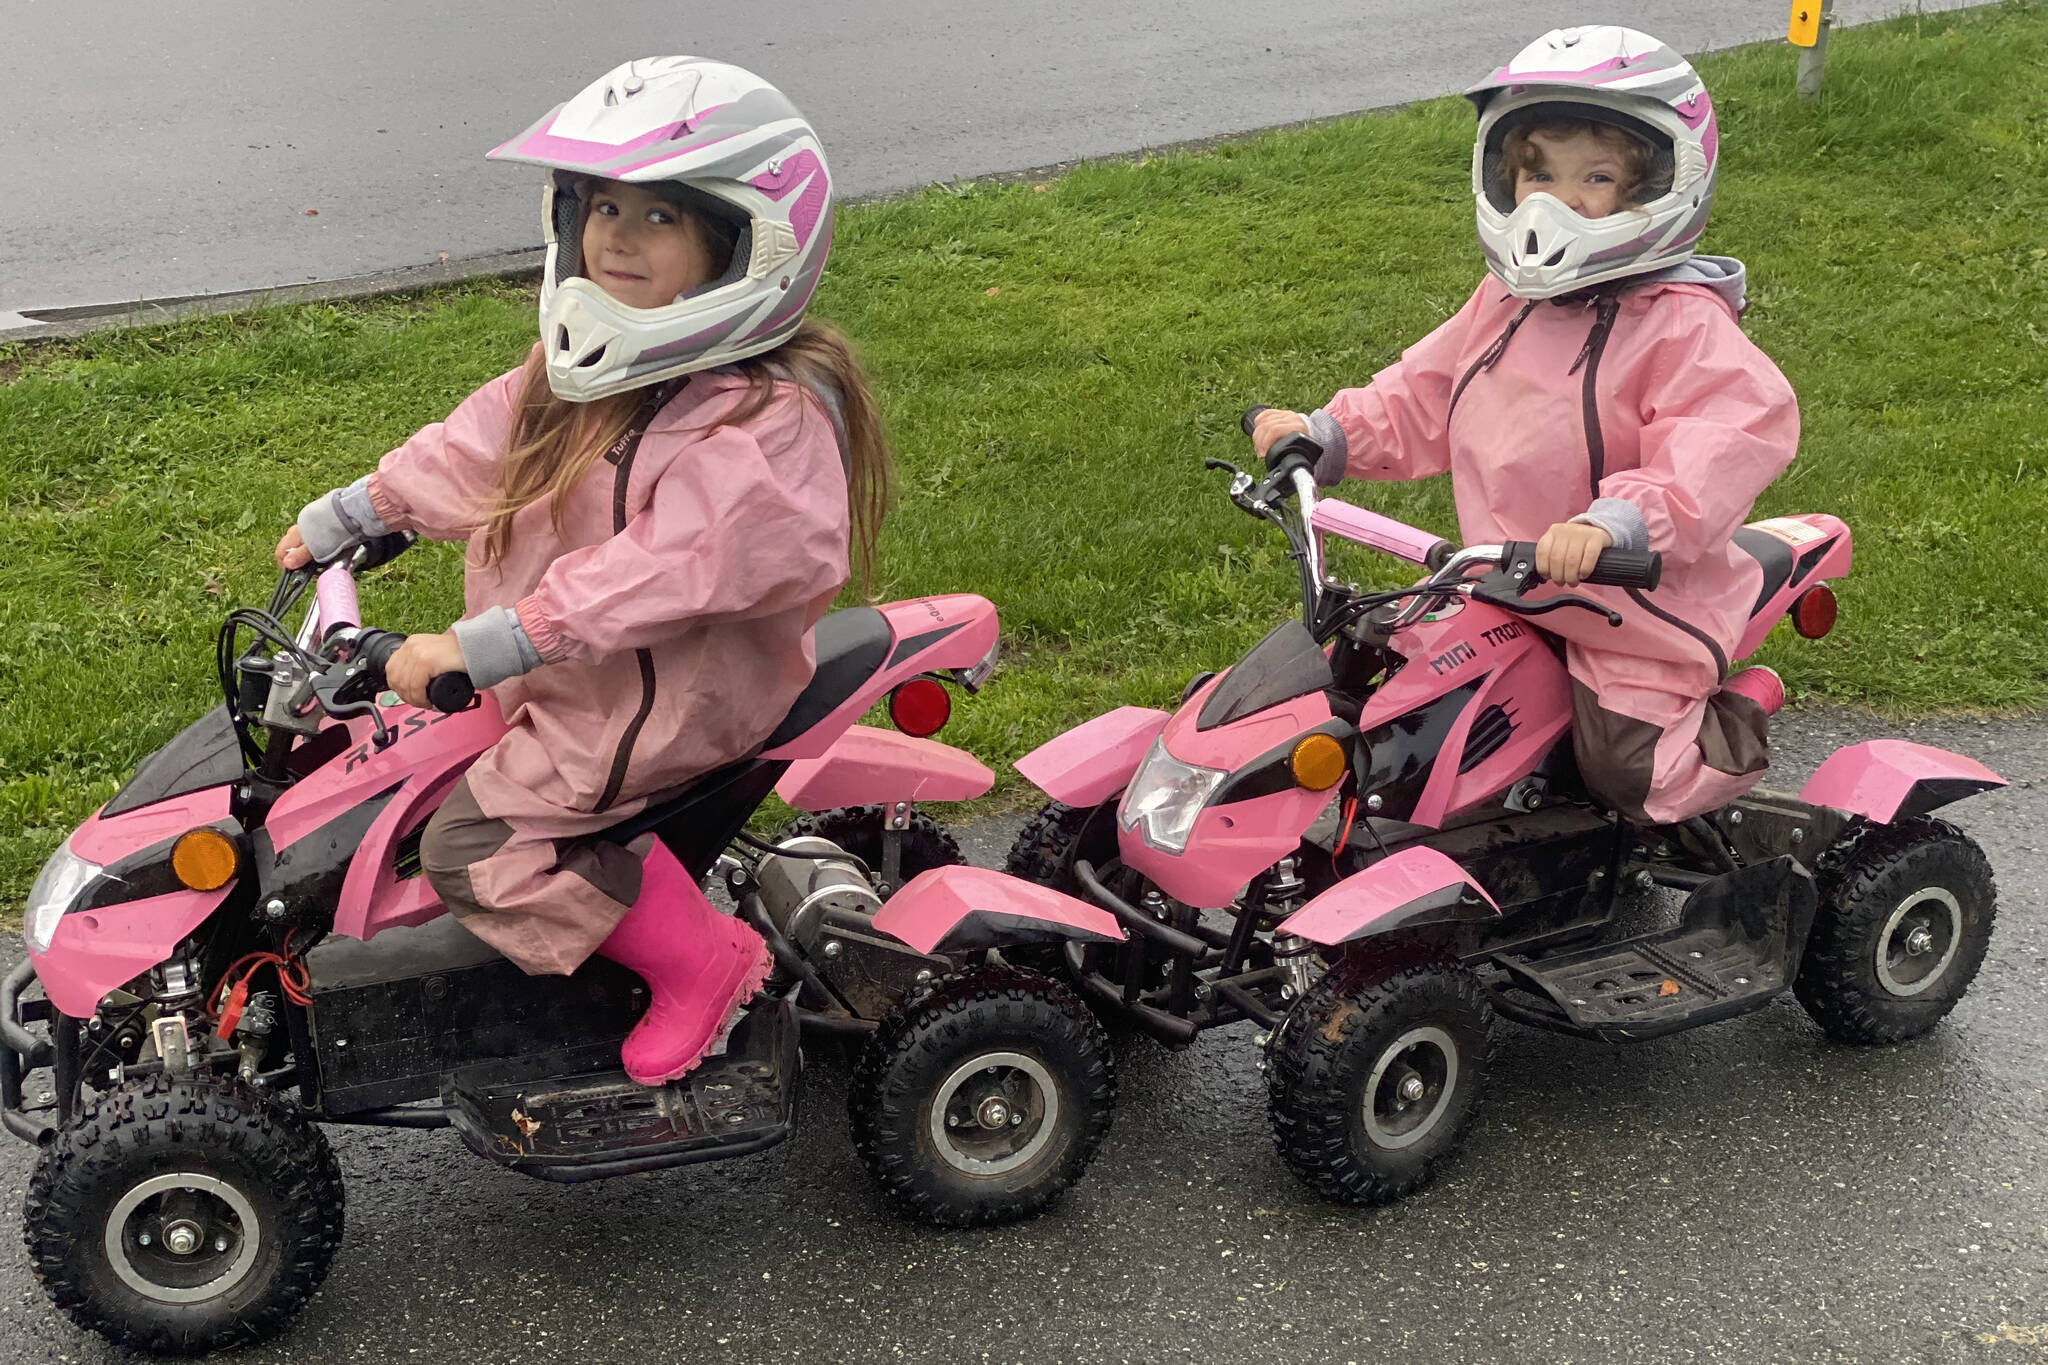 Amelia and Aria D’Angelo, aged five and three, on their pink electric ATVs that were stolen from their parents garage in Chilliwack on Dec. 5, 2021. (Submitted by Gwendolyn D’Angelo)